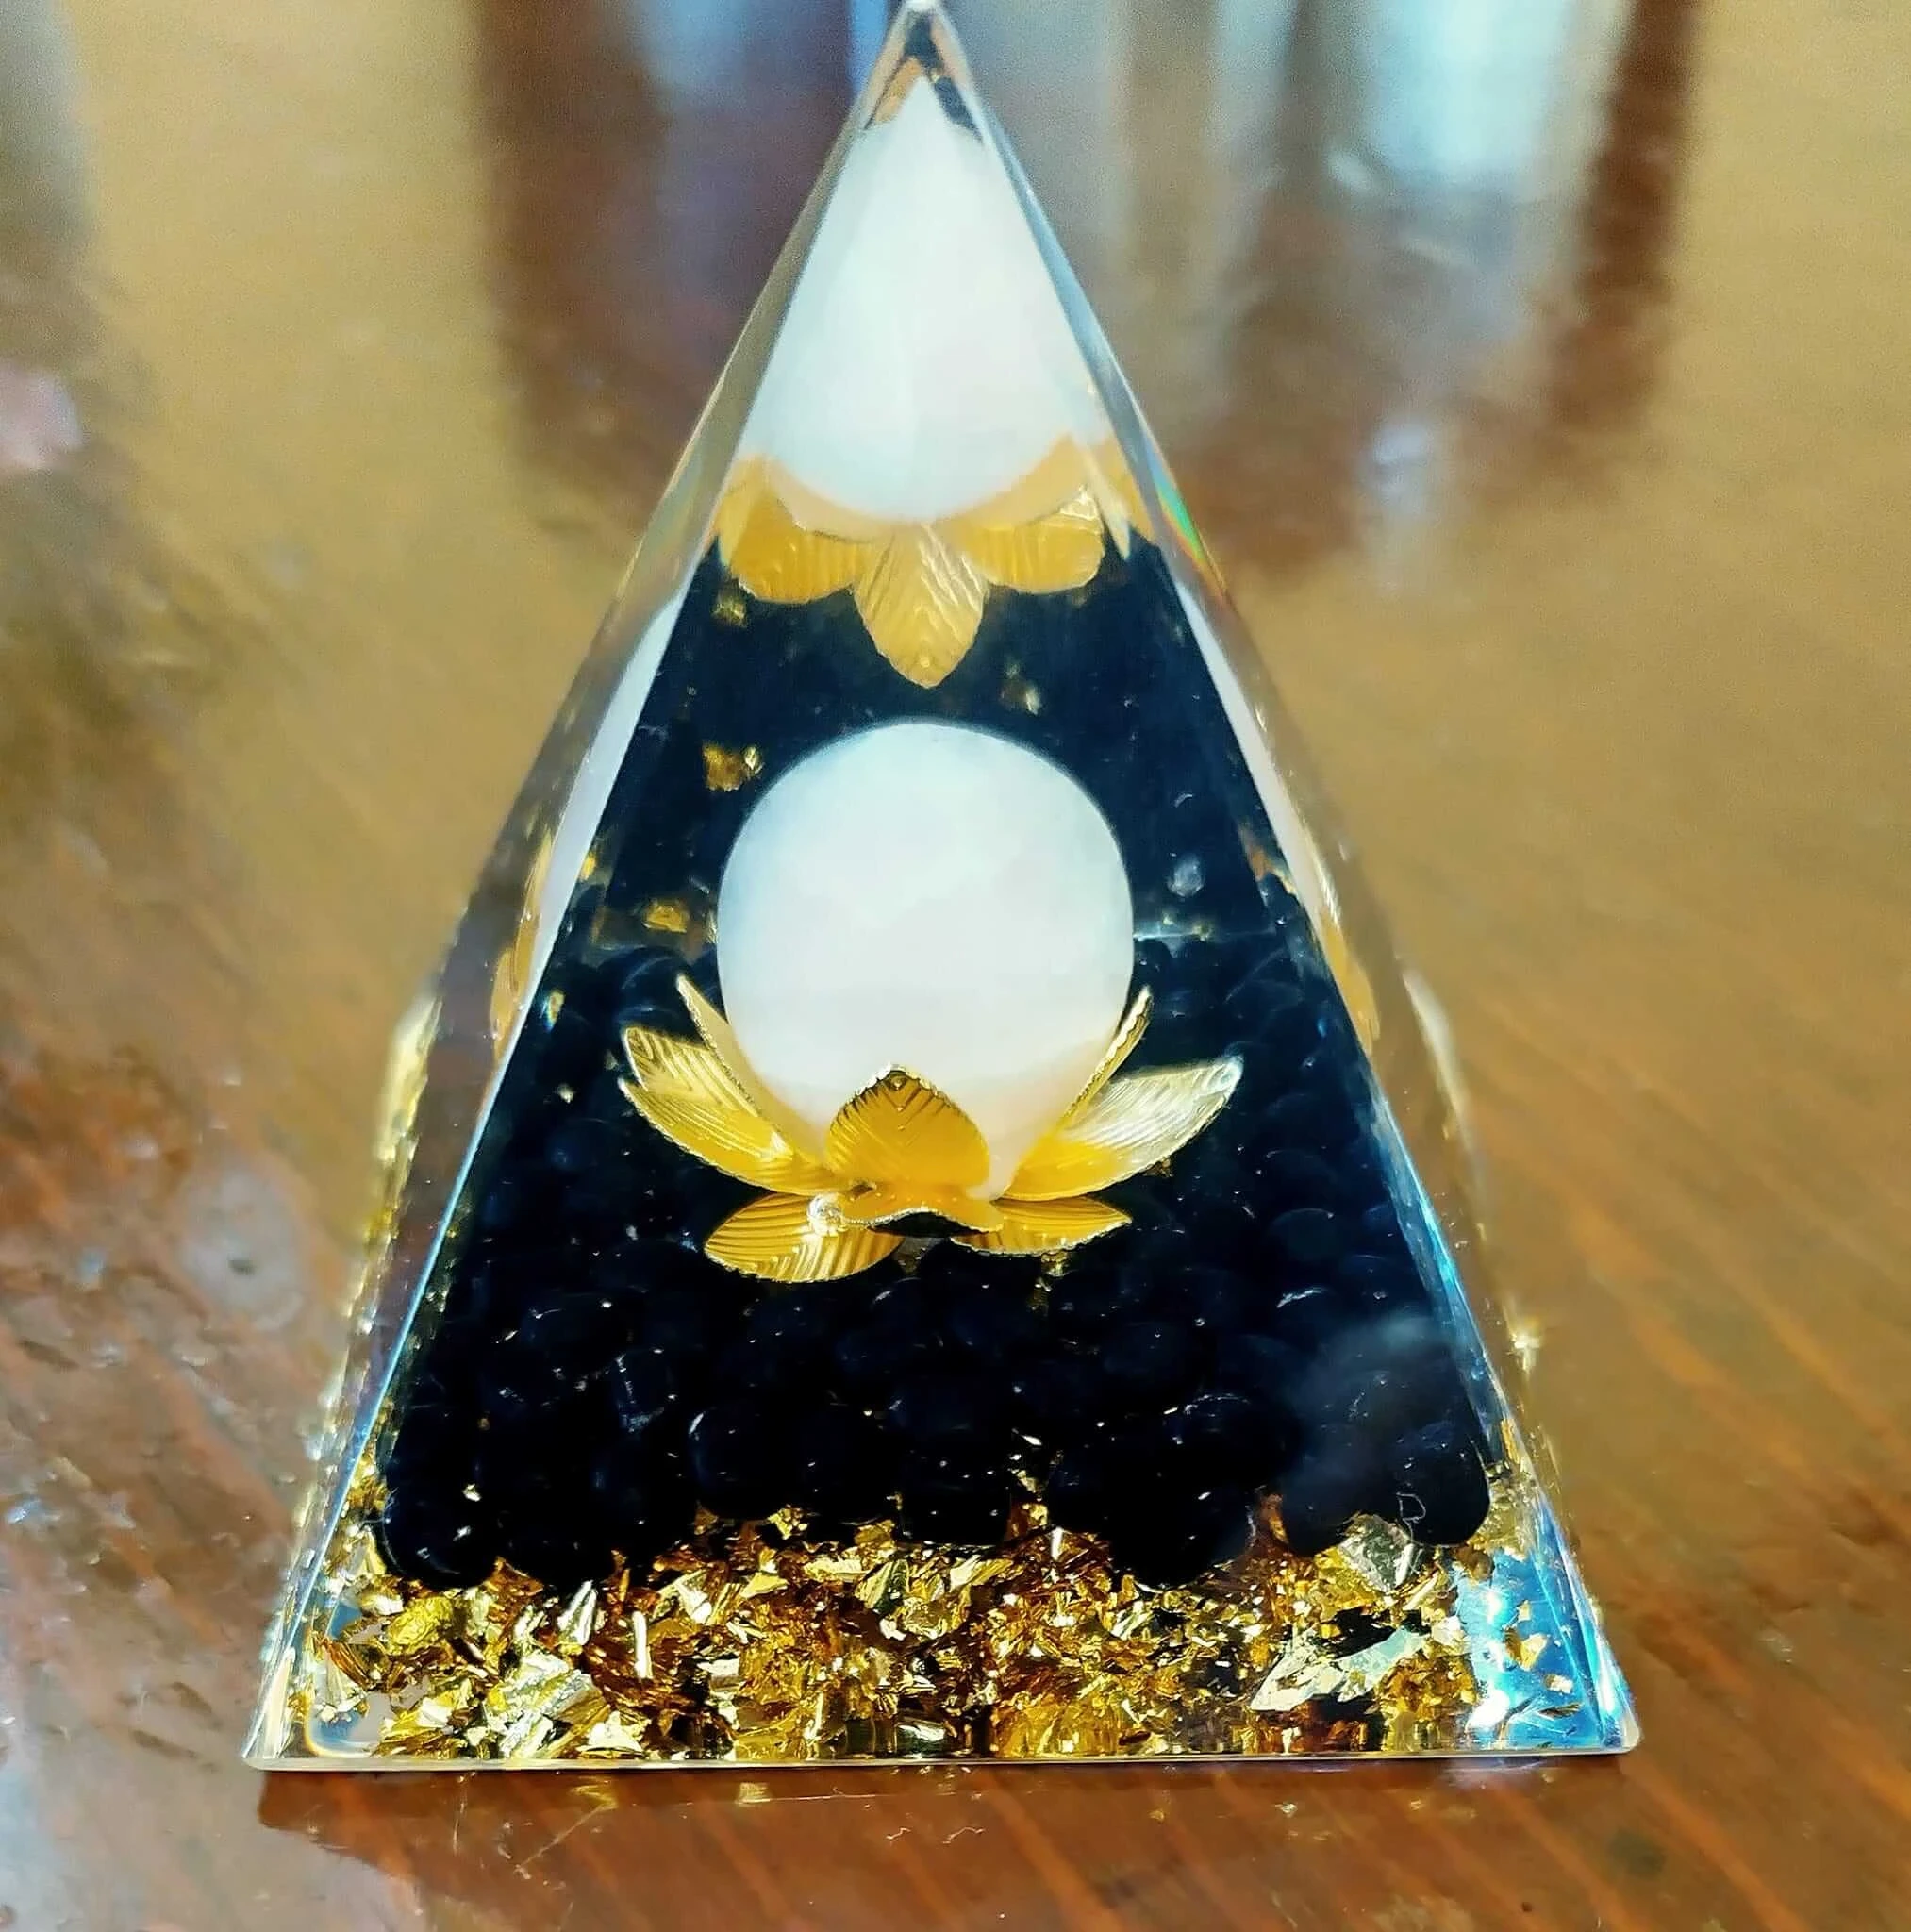 A pyramid of resin with crystal gemstones inside